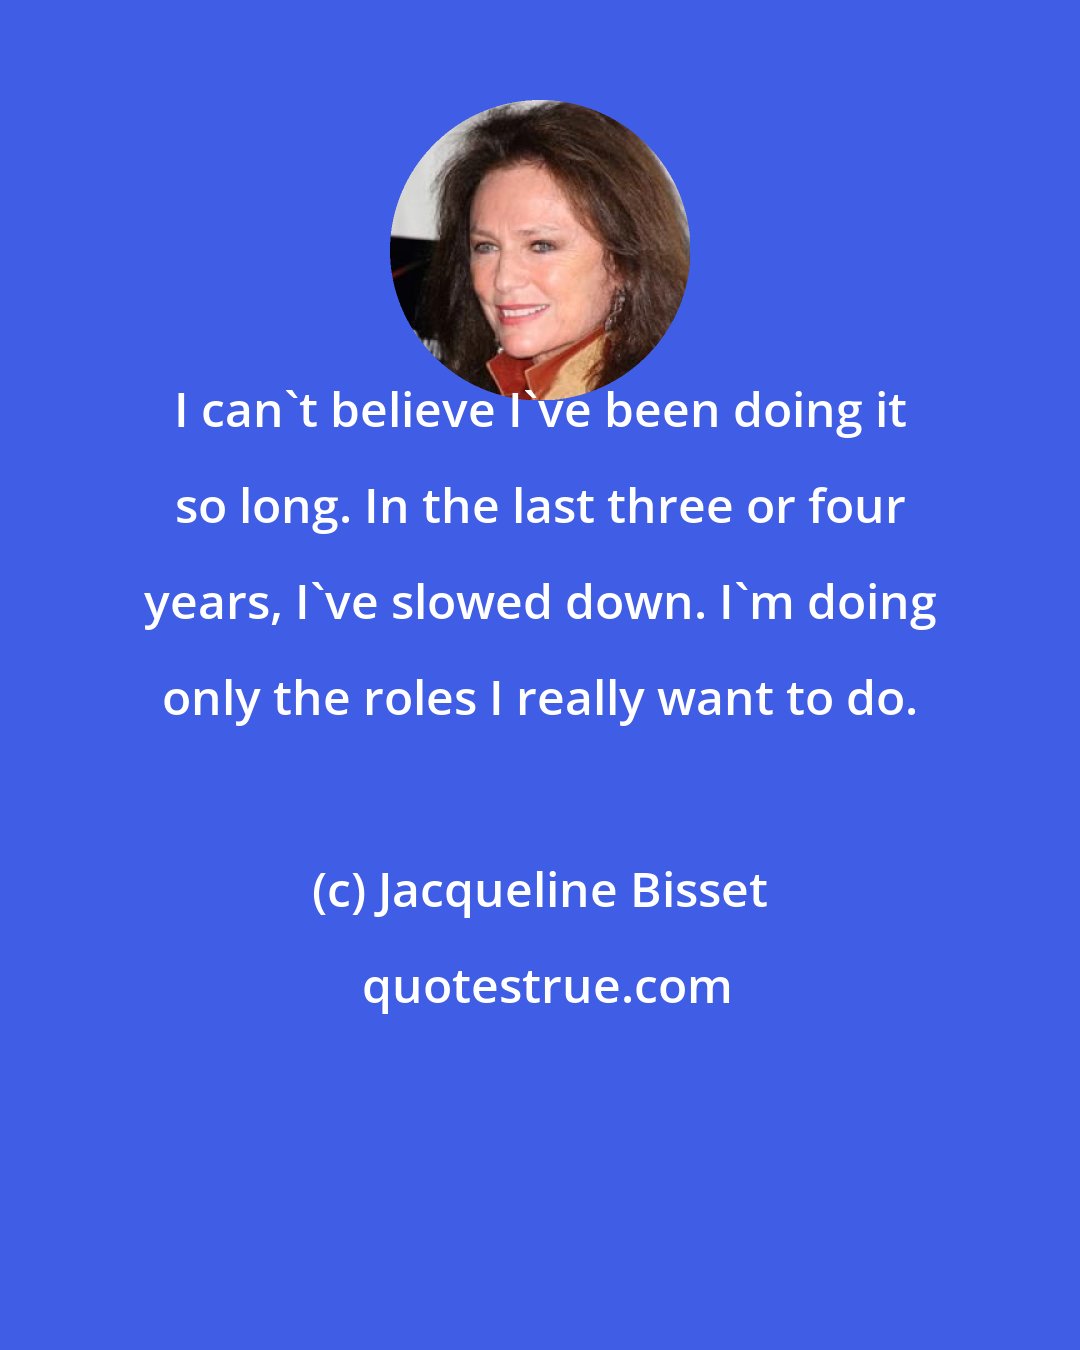 Jacqueline Bisset: I can't believe I've been doing it so long. In the last three or four years, I've slowed down. I'm doing only the roles I really want to do.